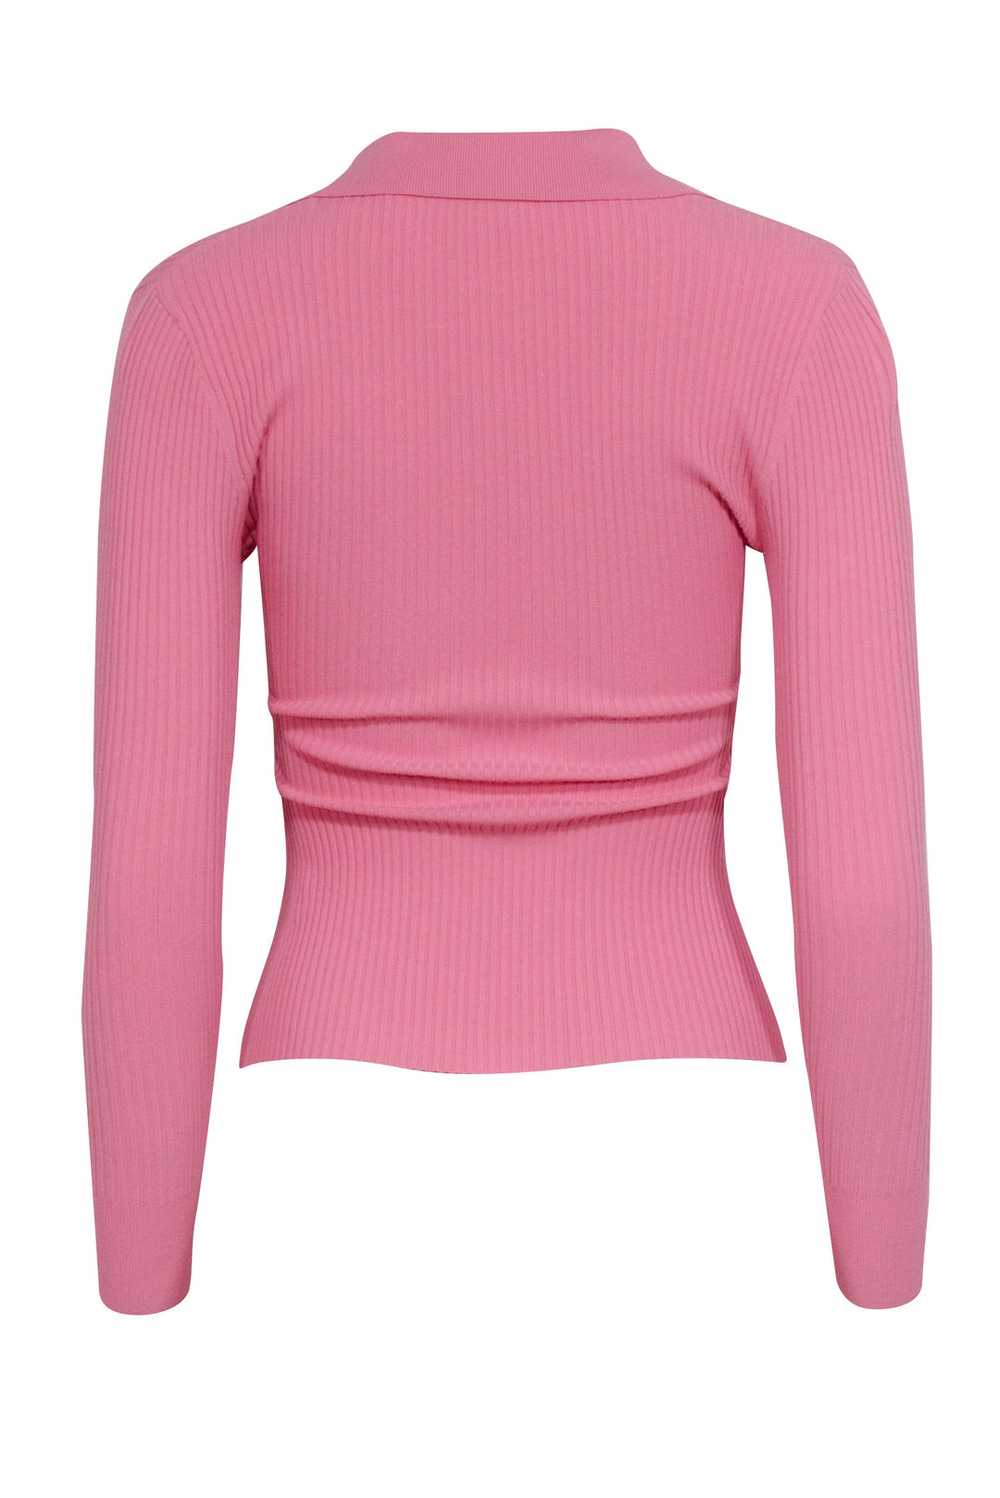 A.L.C. - Pink Ribbed Knit Polo Top Sz XS - image 3